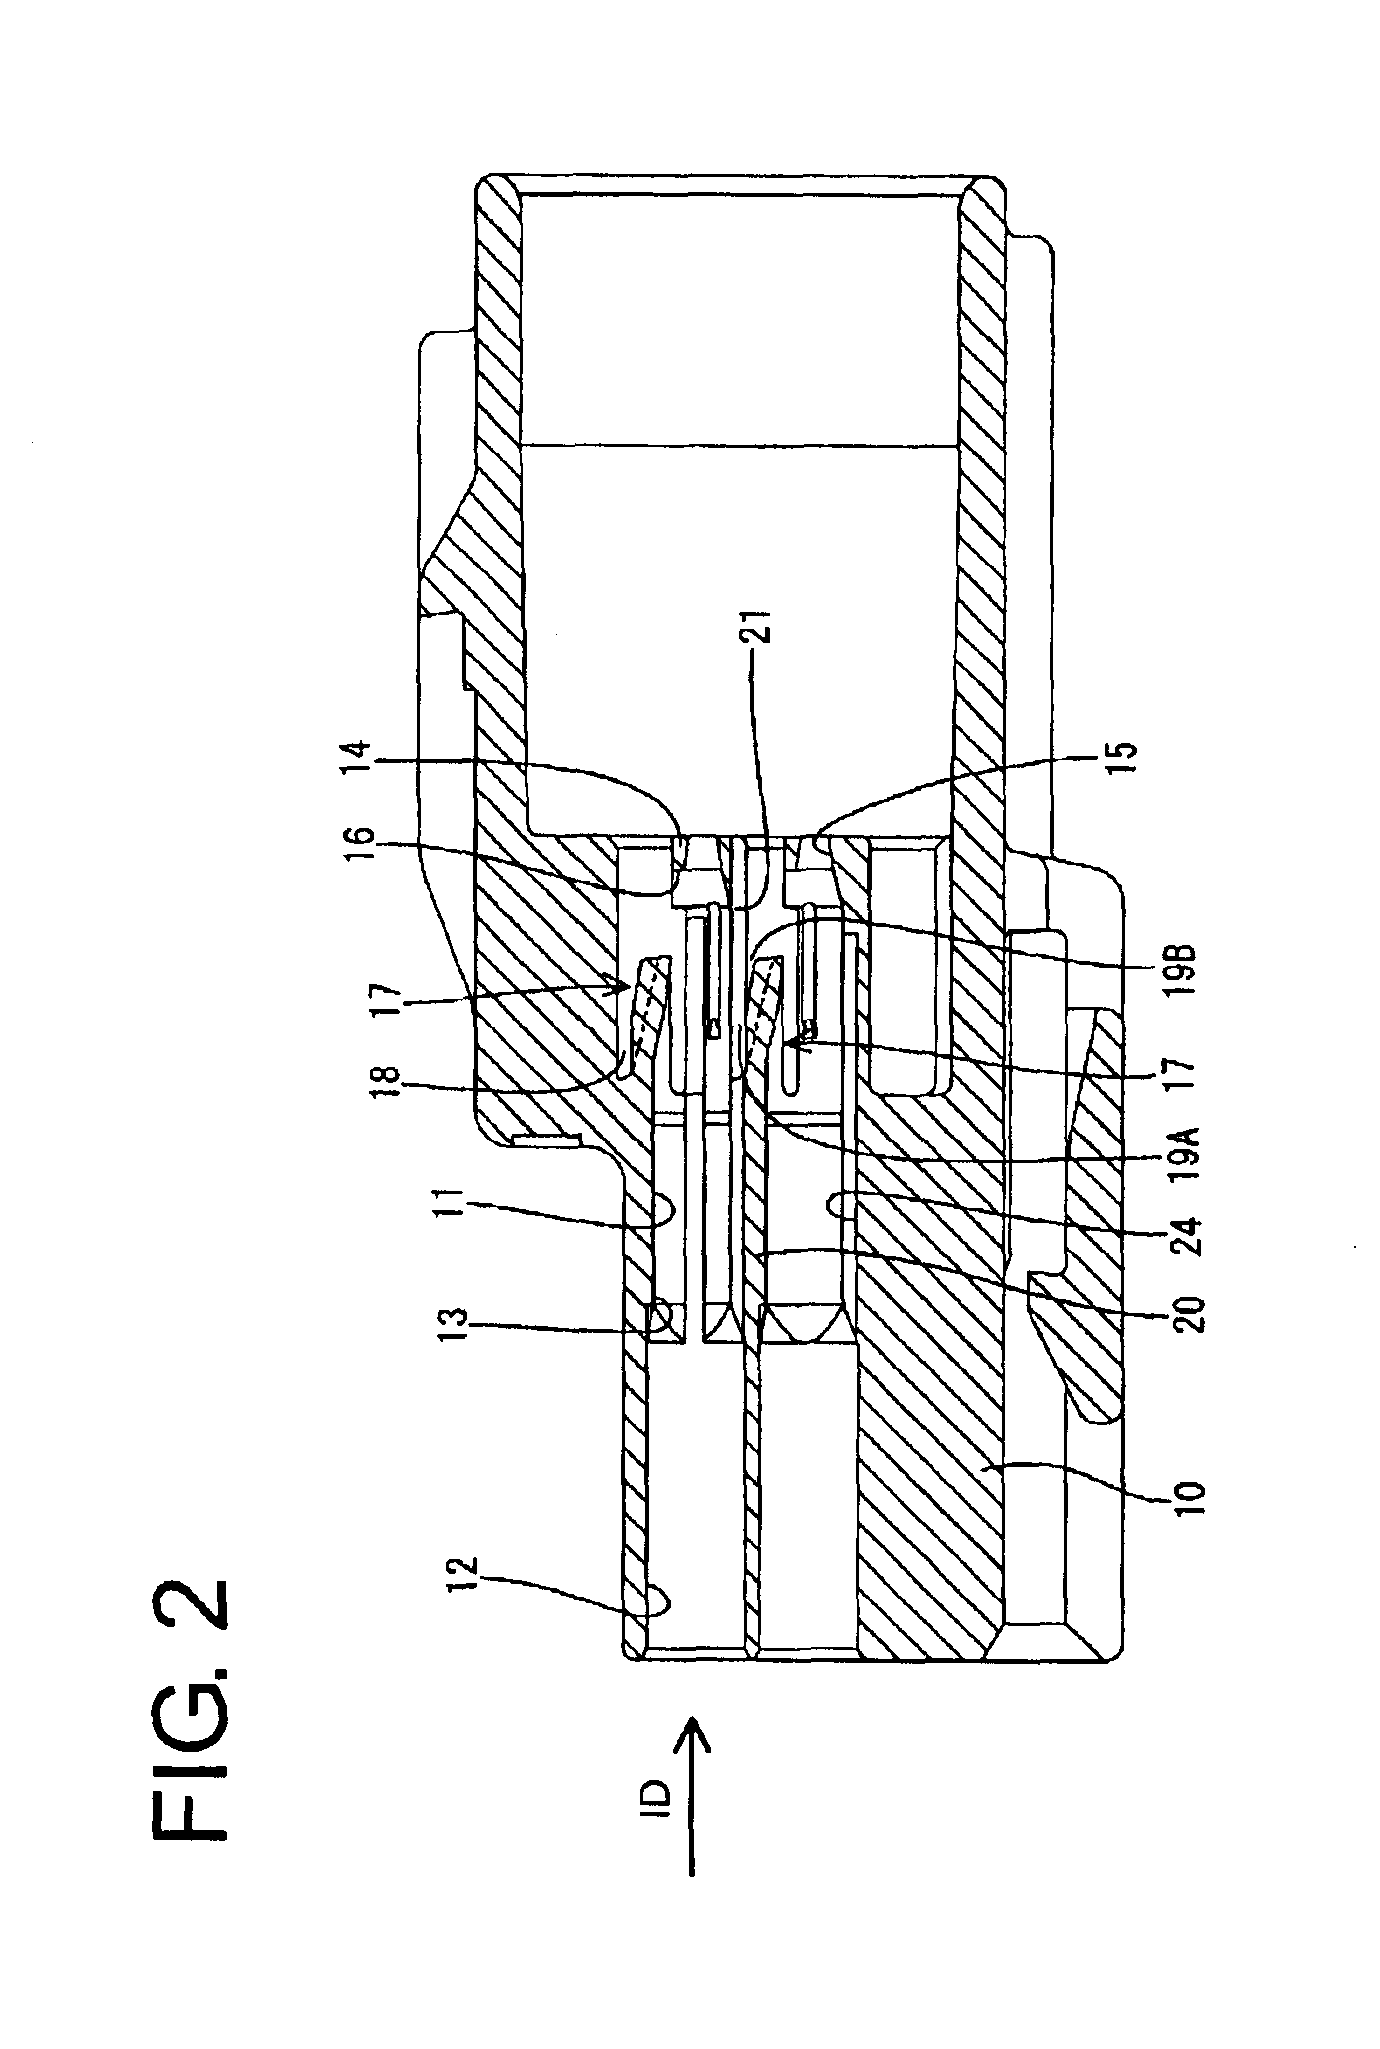 Connector housing with resilient lock having increased rigidity